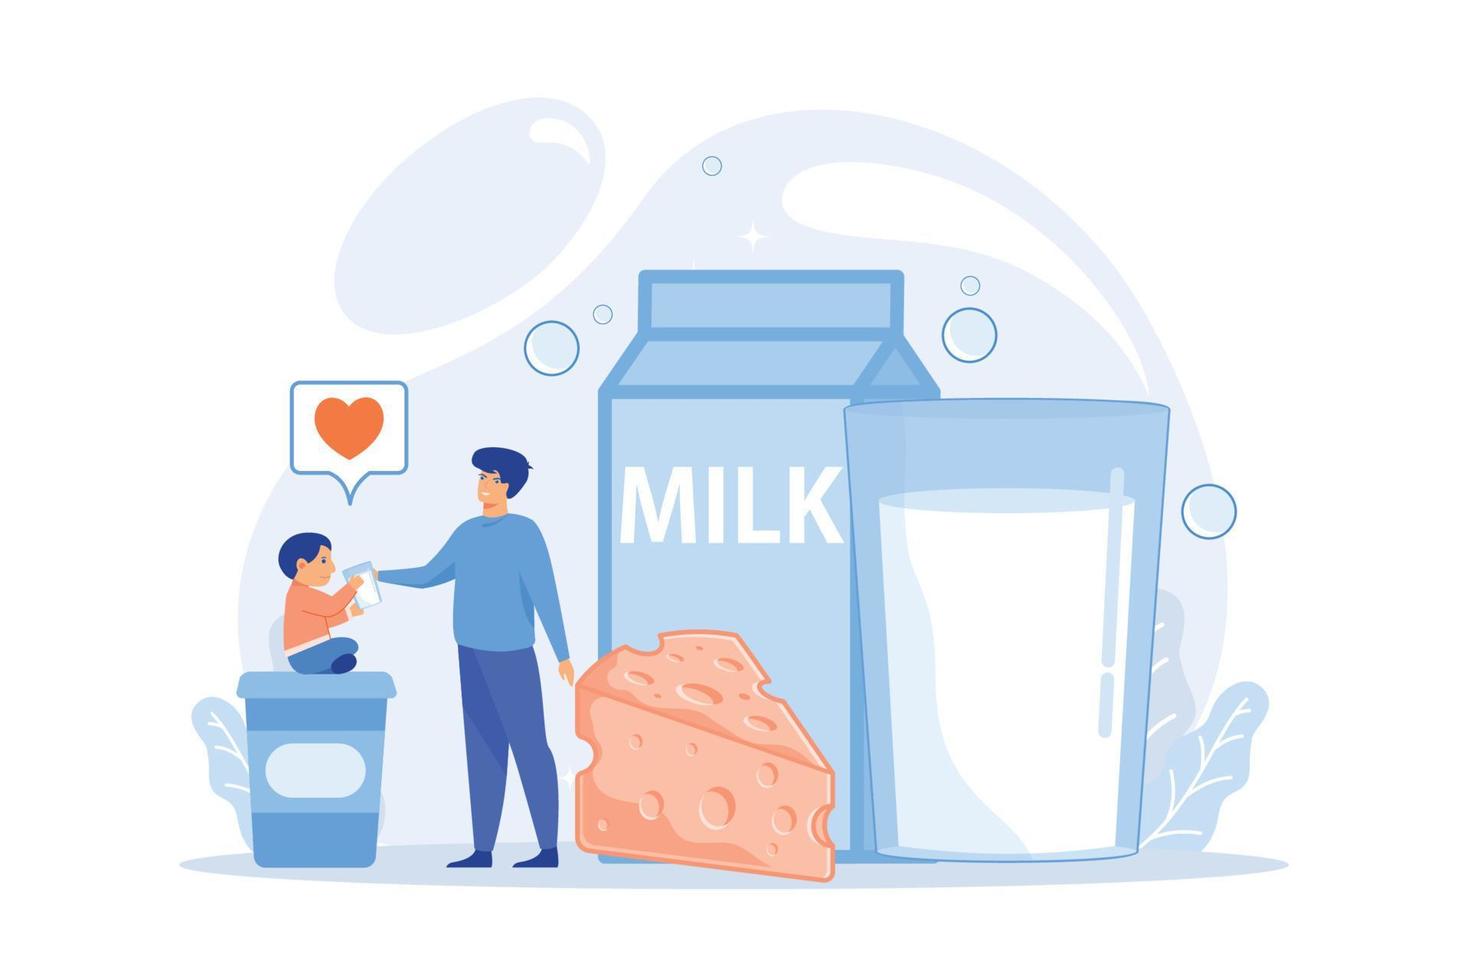 Dairy products, cheese, yoghurt and kid likes drinking milk, tiny people. Dairy products, milk based nutrition, dairy products production concept. flat vector modern illustration